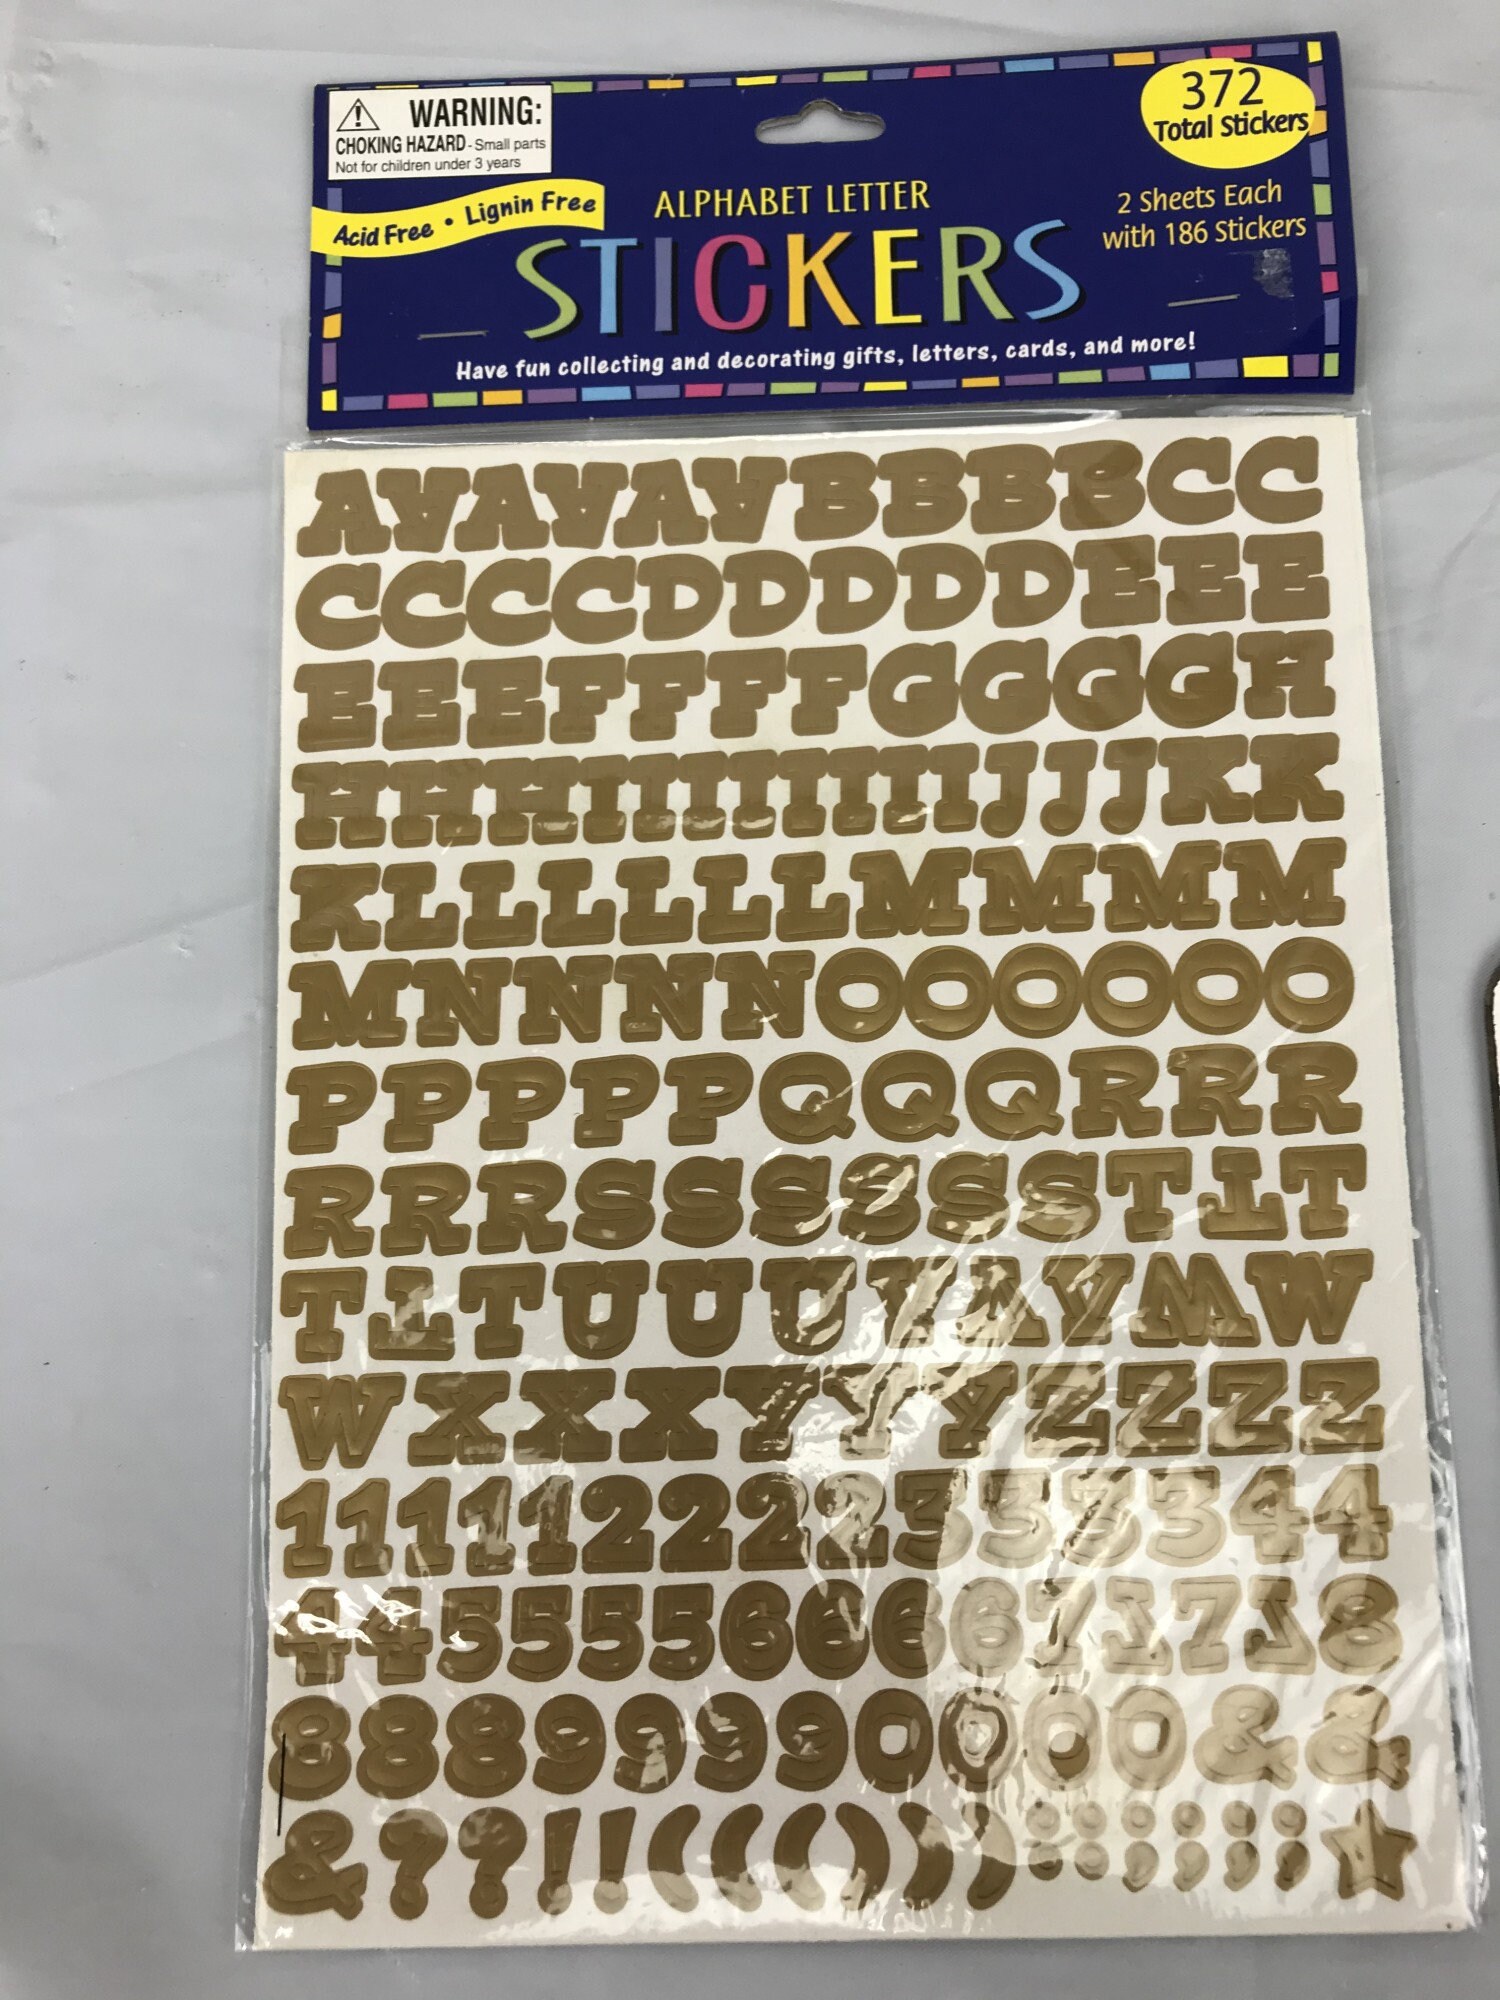 1pcs Gold Cursive Letter Stickers Gold Foil Calligraphy Letter Decals Large Alphabet  Letters Stickers Scrabooking Moonlightsupplies 